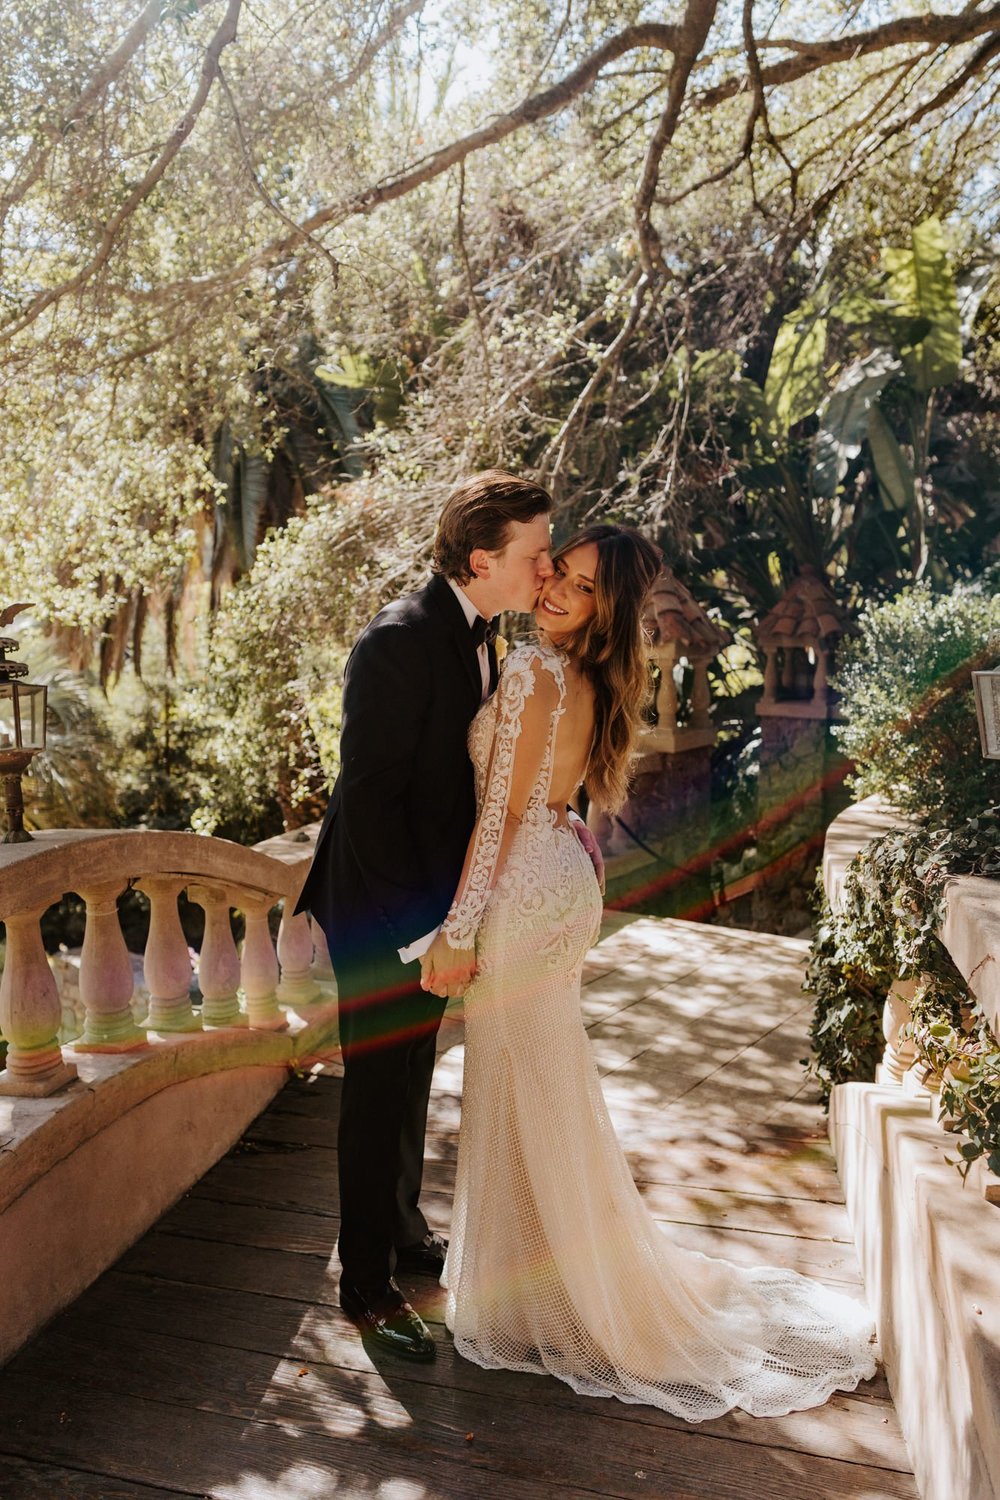 Galia Lahav wedding dress long sleeve detailed bridal gown at The Houdini Estate wedding in los angeles, ca. Vibrant and candid los angeles wedding photography by Tida Svy